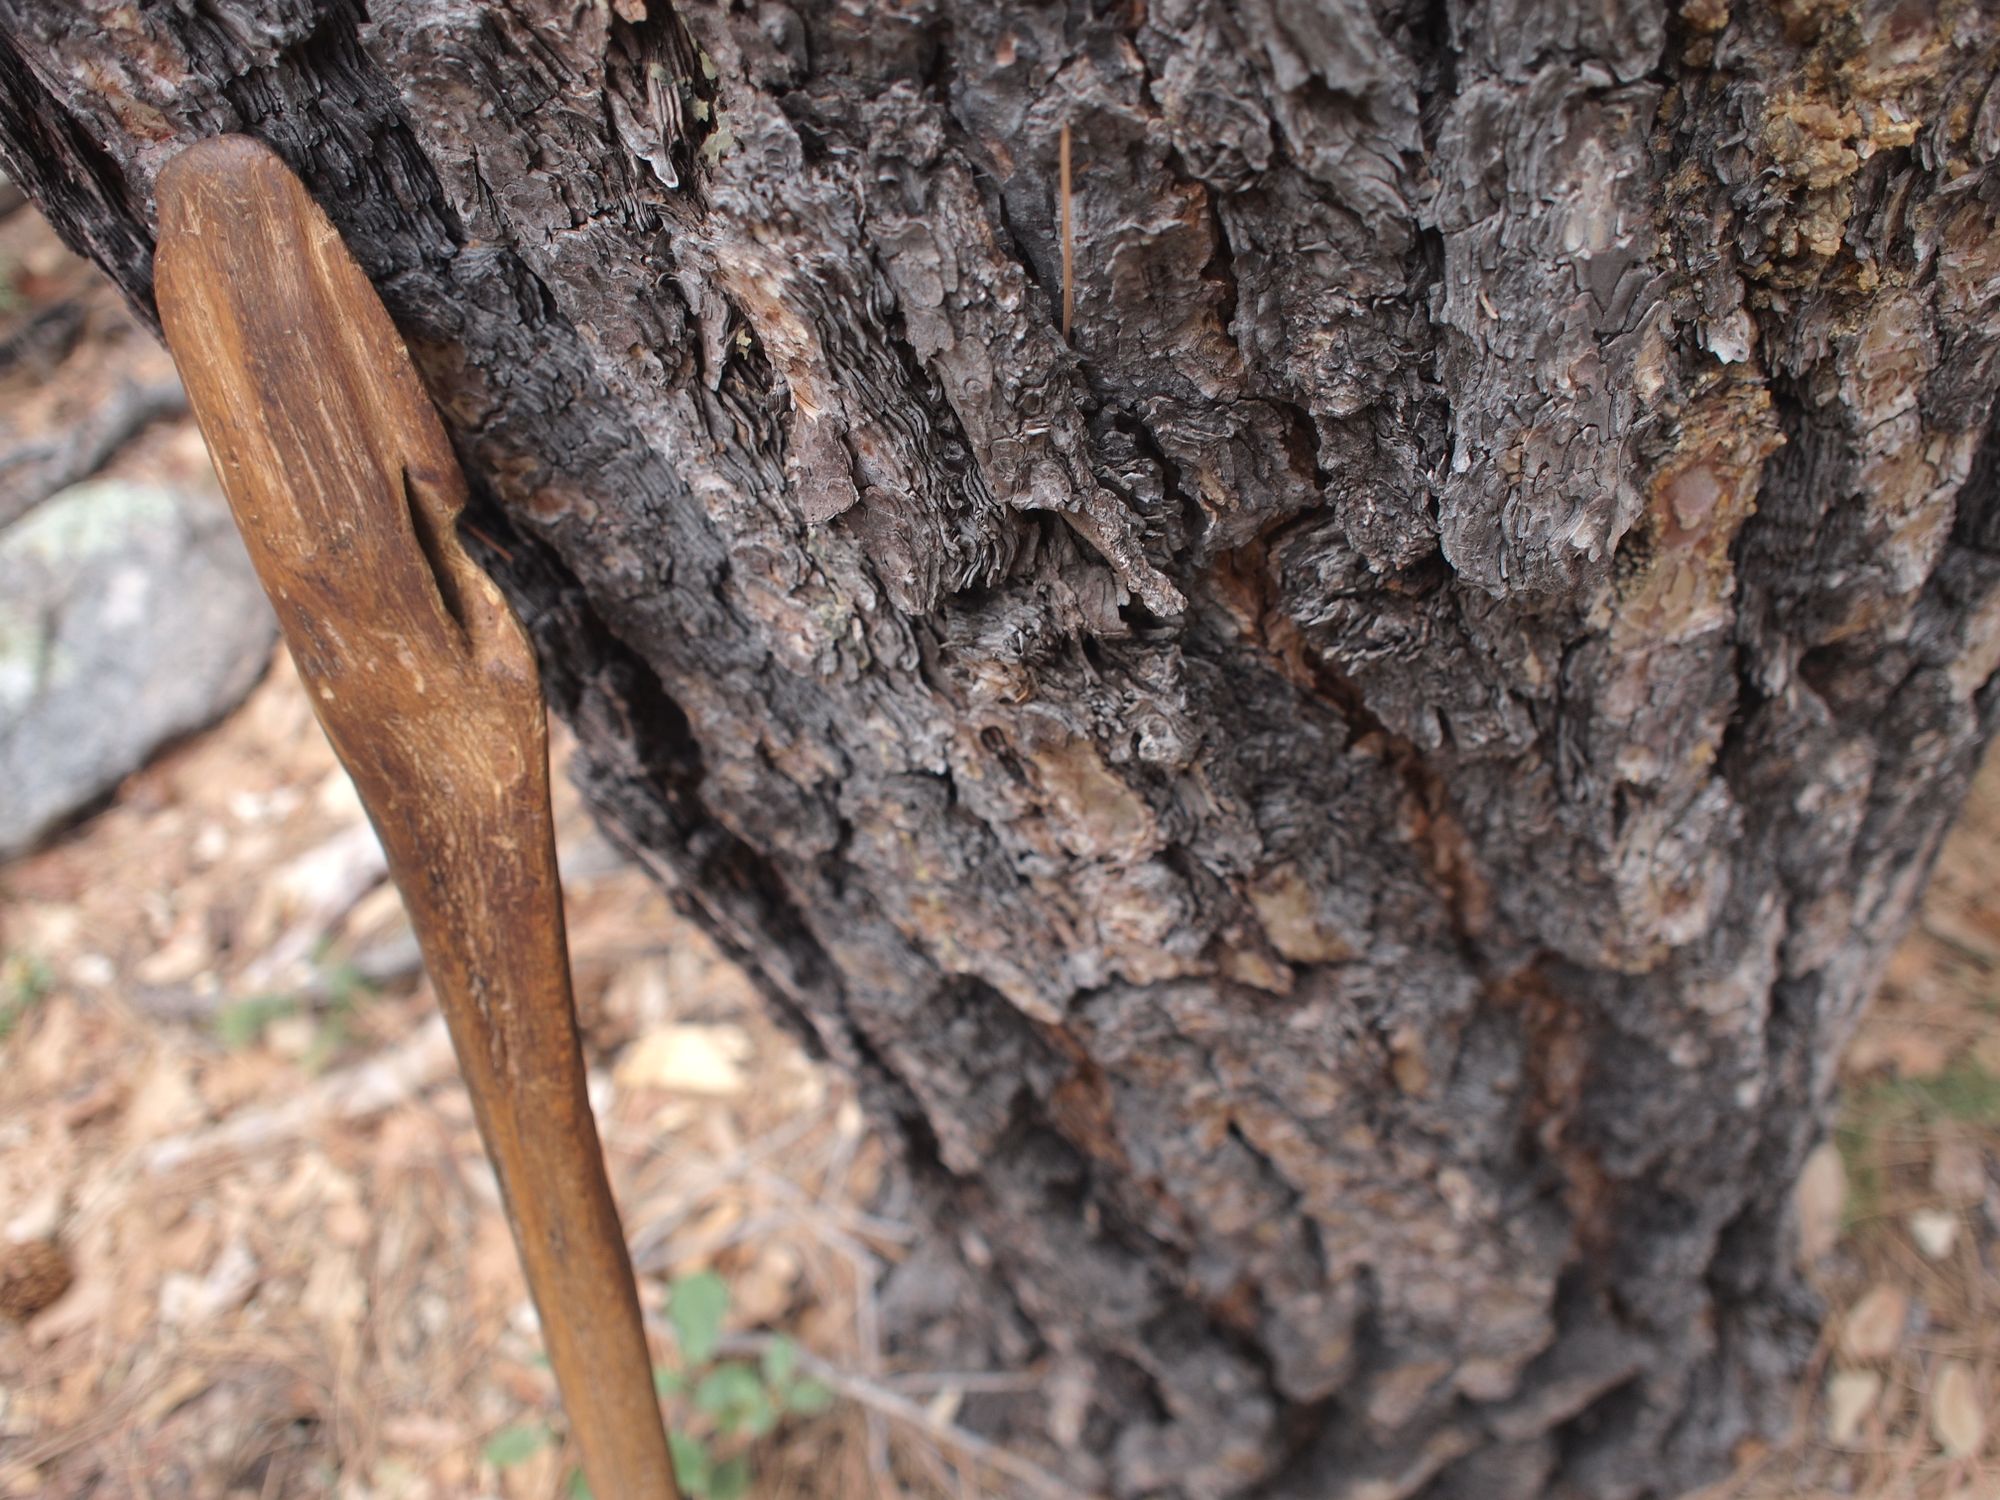 A wooden walking stick leans against the highly textured grey bark of a ponderosa pine